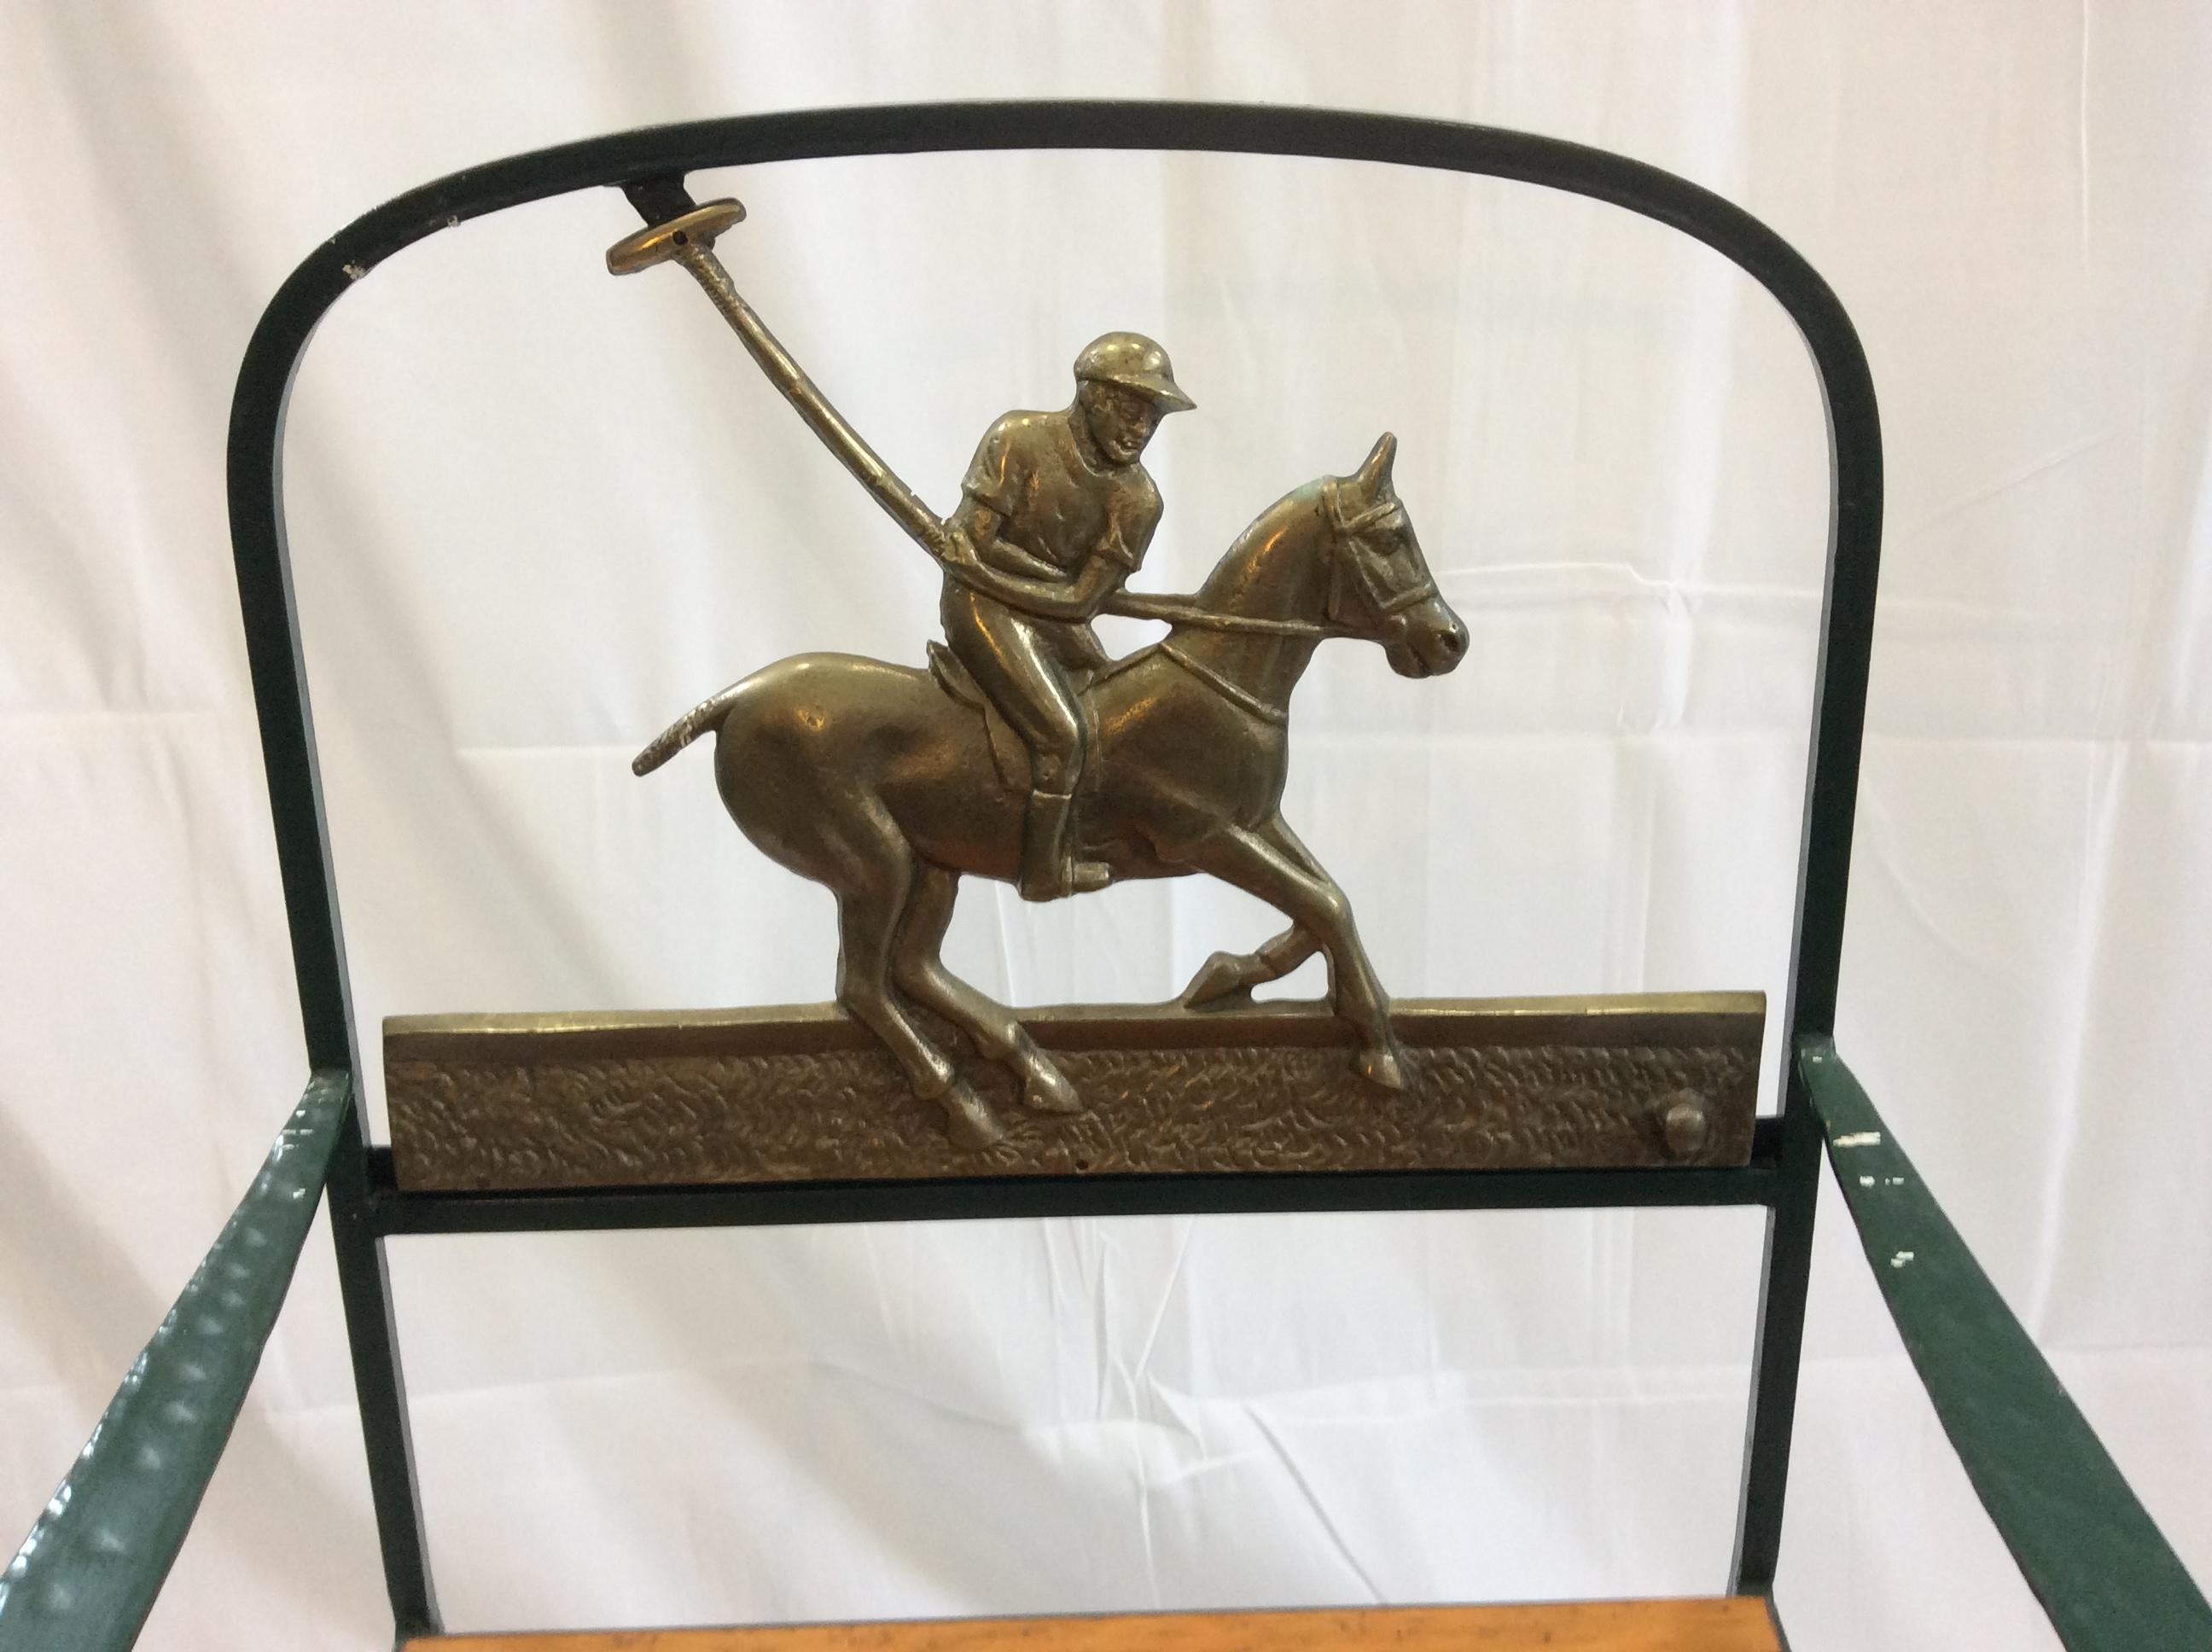 Cast brass polo player back, heavy wrought iron chair frame.
Wooden slat seat, square shaped legs on round pad feet.
Flat dimpled arm ending in a simple scroll. Made by Florentine craftsmen in long island city... These designs were sold through MJ